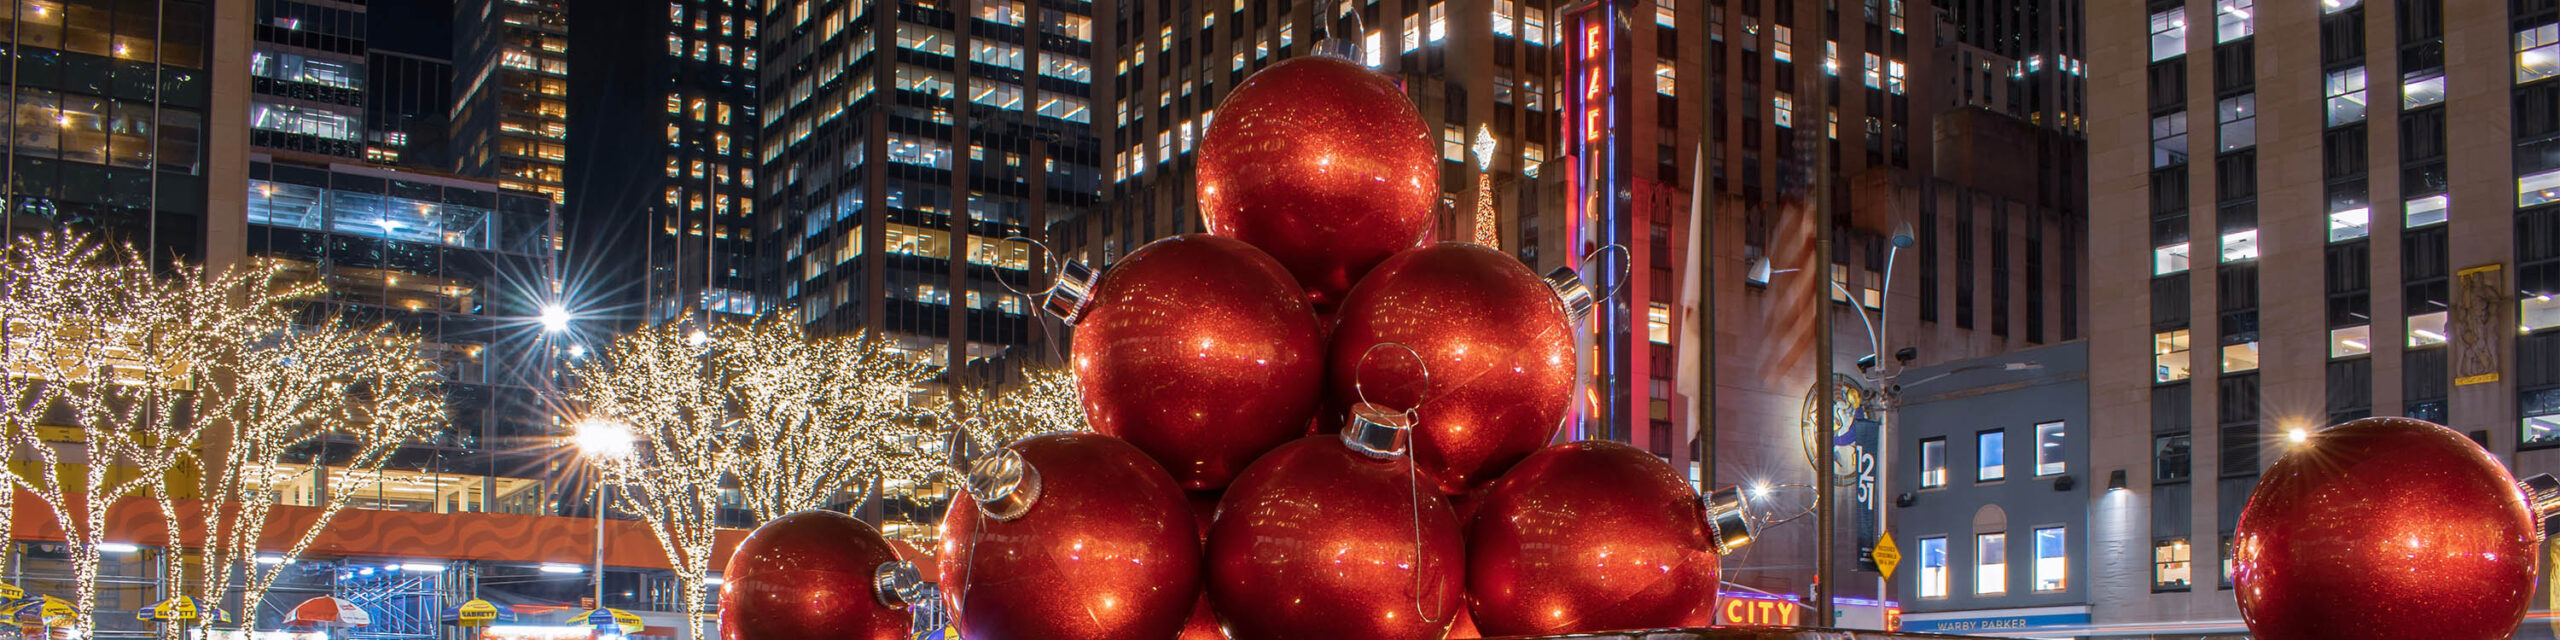 GIant red ball holiday ornaments and Radio City Music in background on NYC street